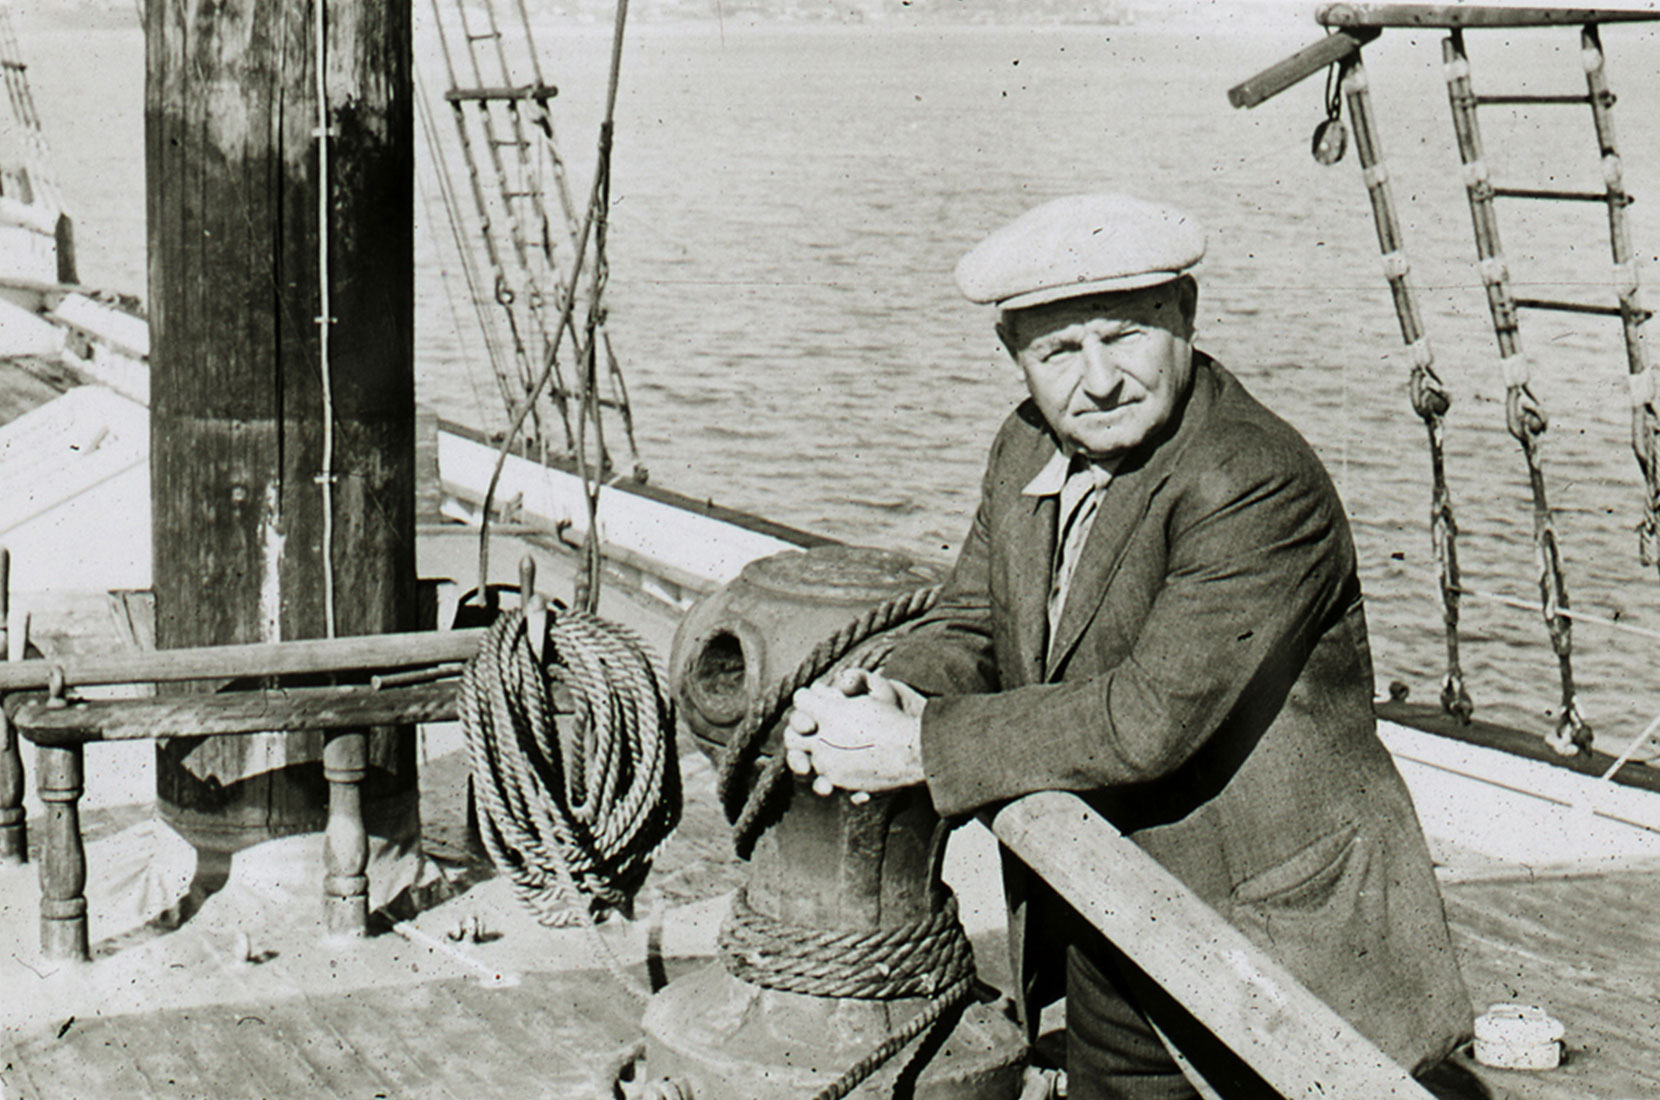 Black and white photo of a man in a worn sport coat and newsies cap leaning on the rail of a ship. A mask and rigging can be seen in the background.